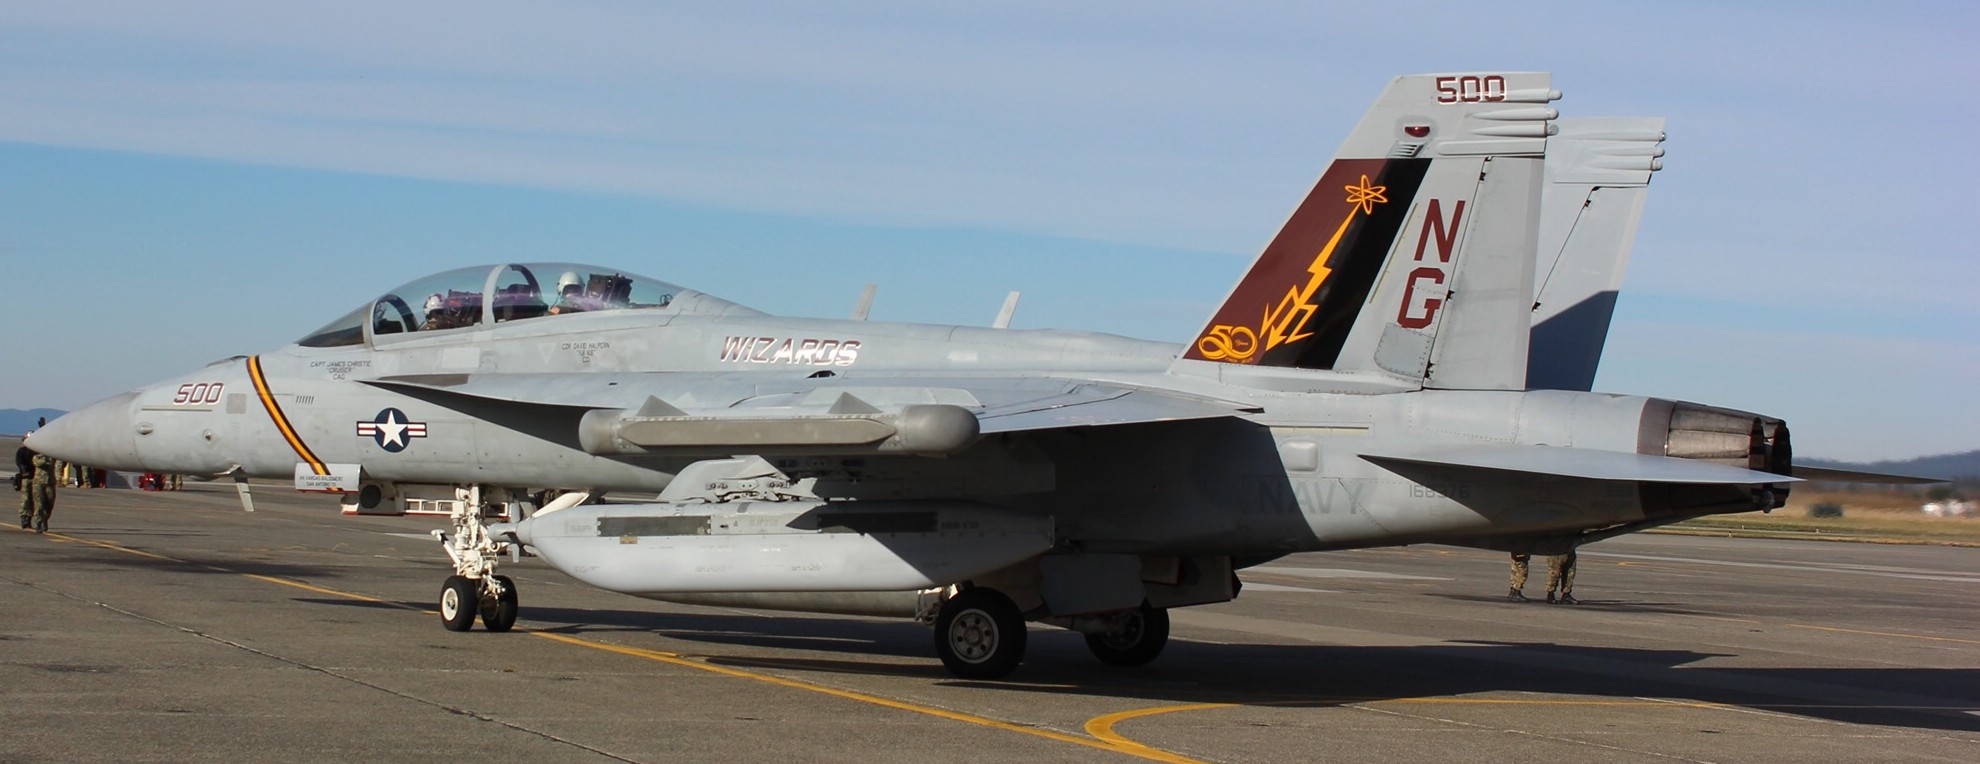 vaq-133 wizards electronic attack squadron vaqron us navy boeing ea-18g growler nas whidbey island 58